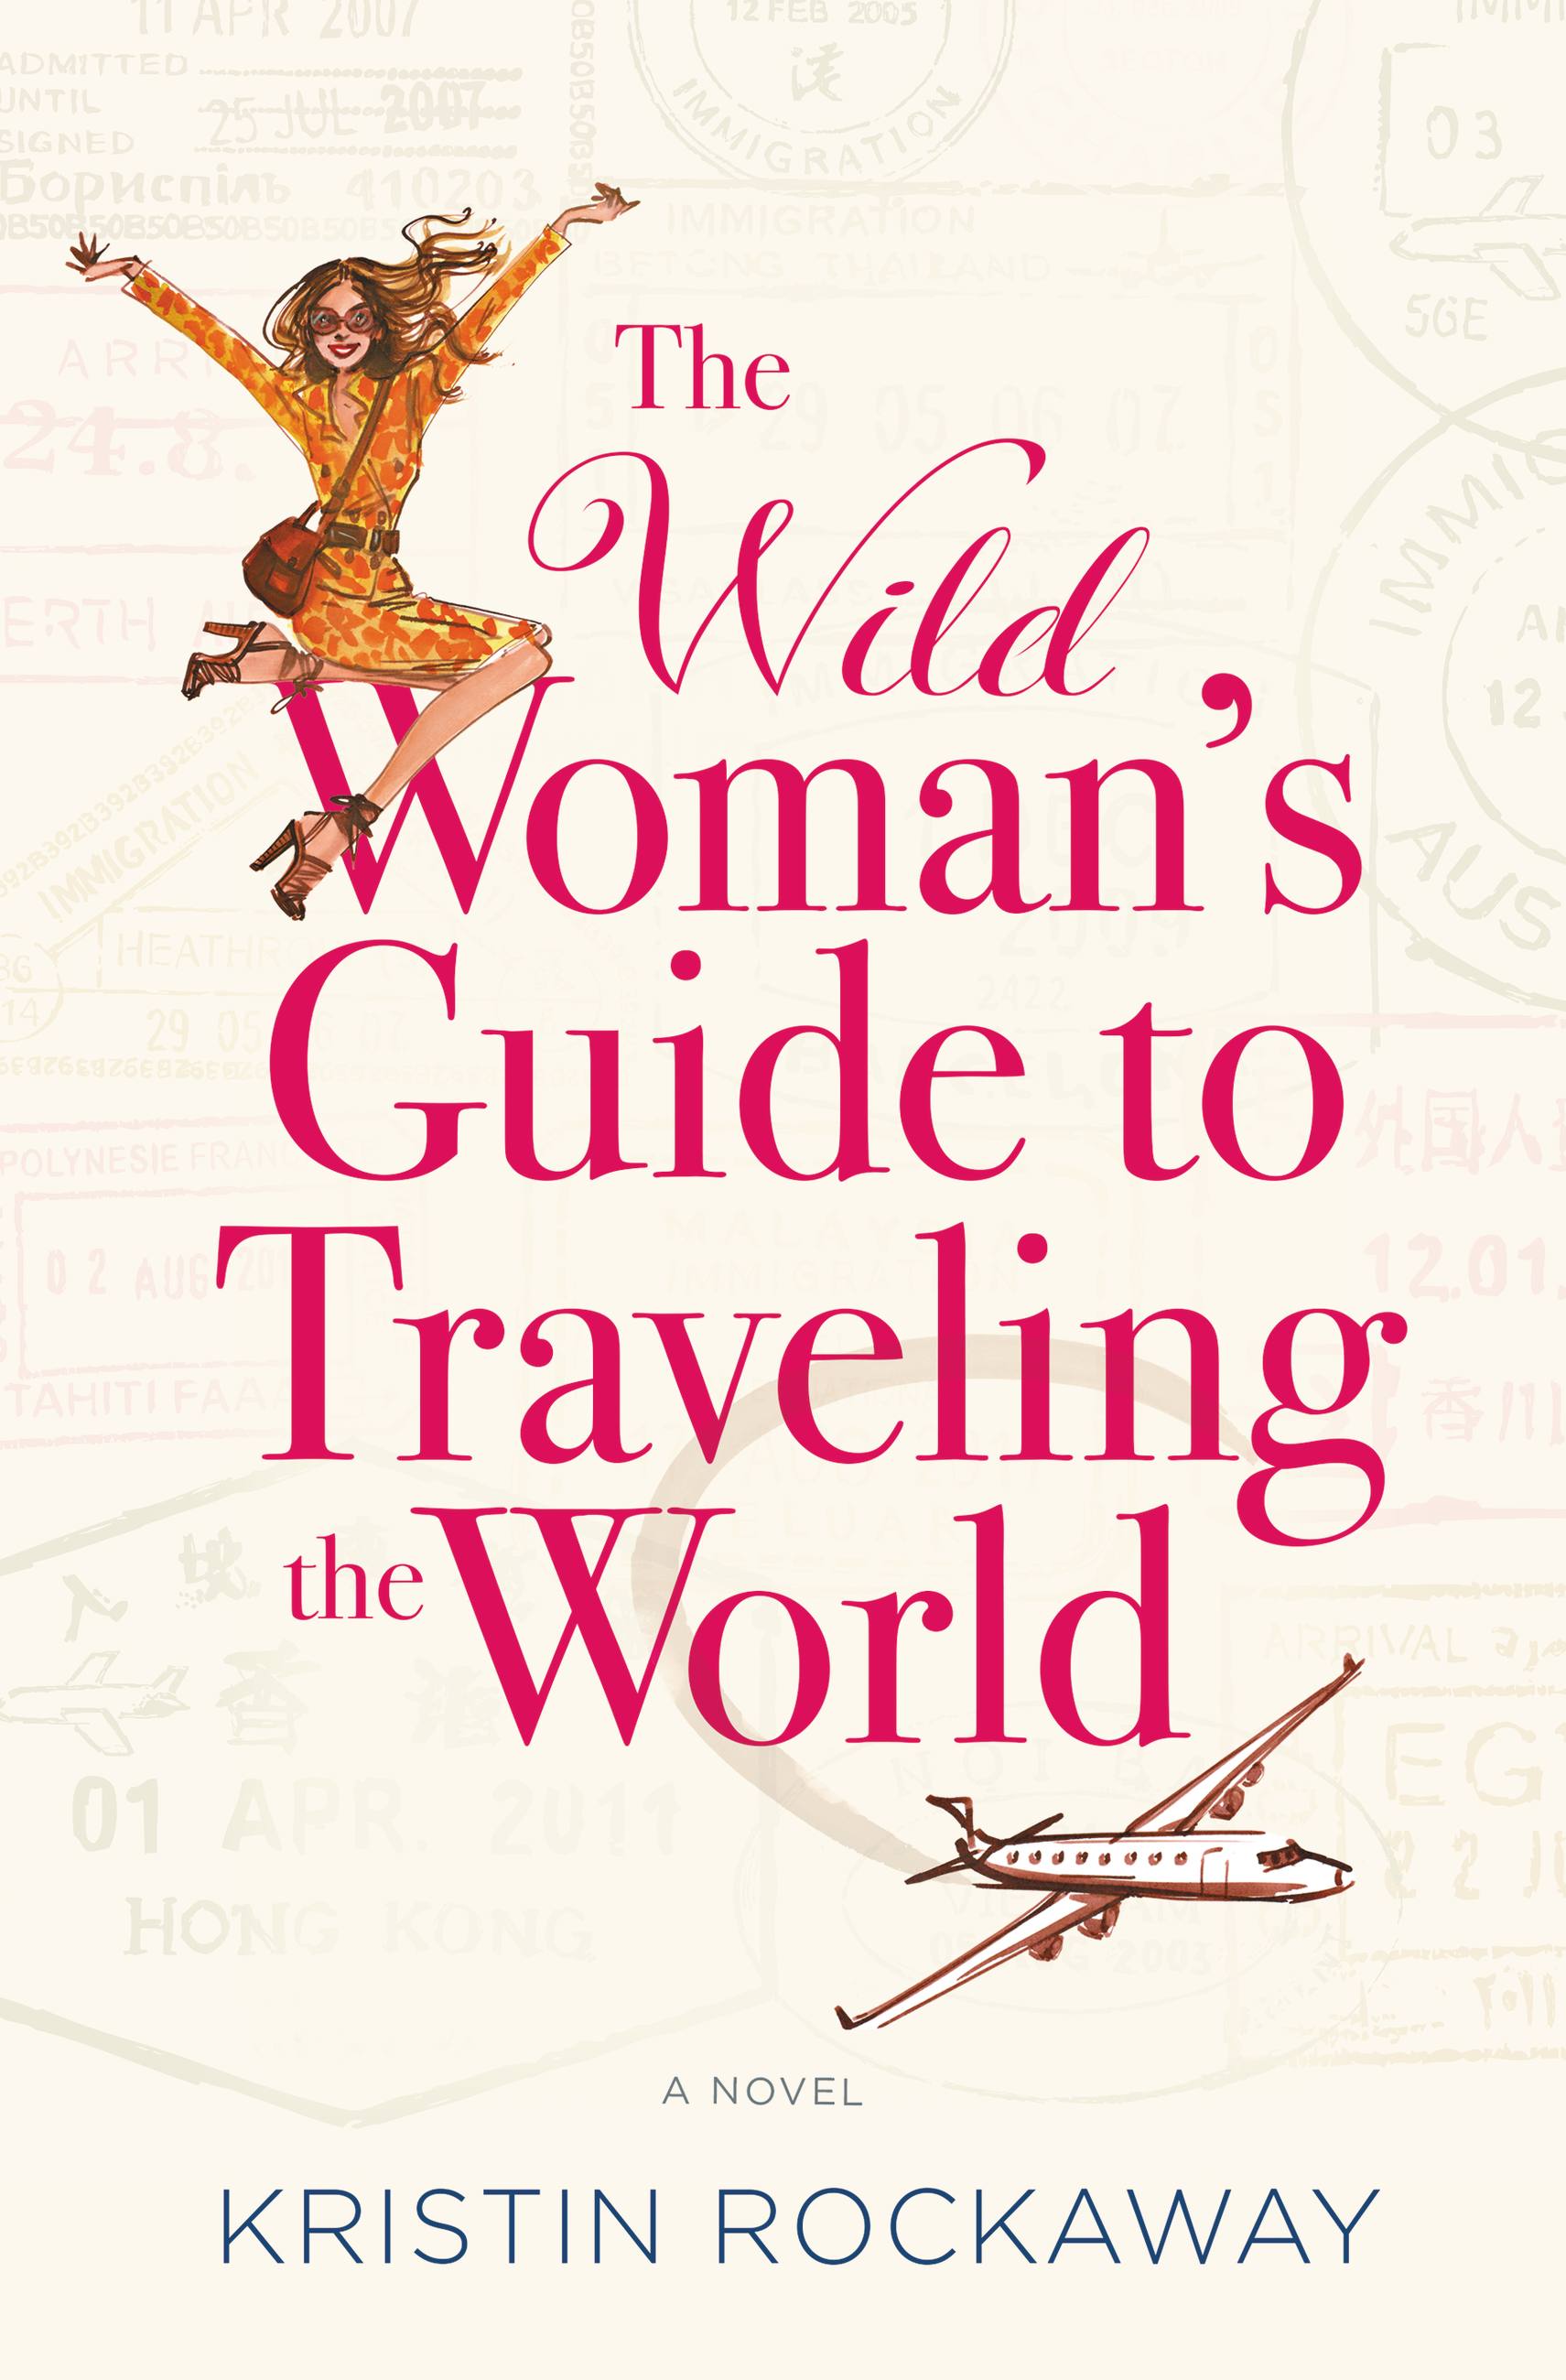 Image de couverture de The Wild Woman's Guide to Traveling the World [electronic resource] : A Novel